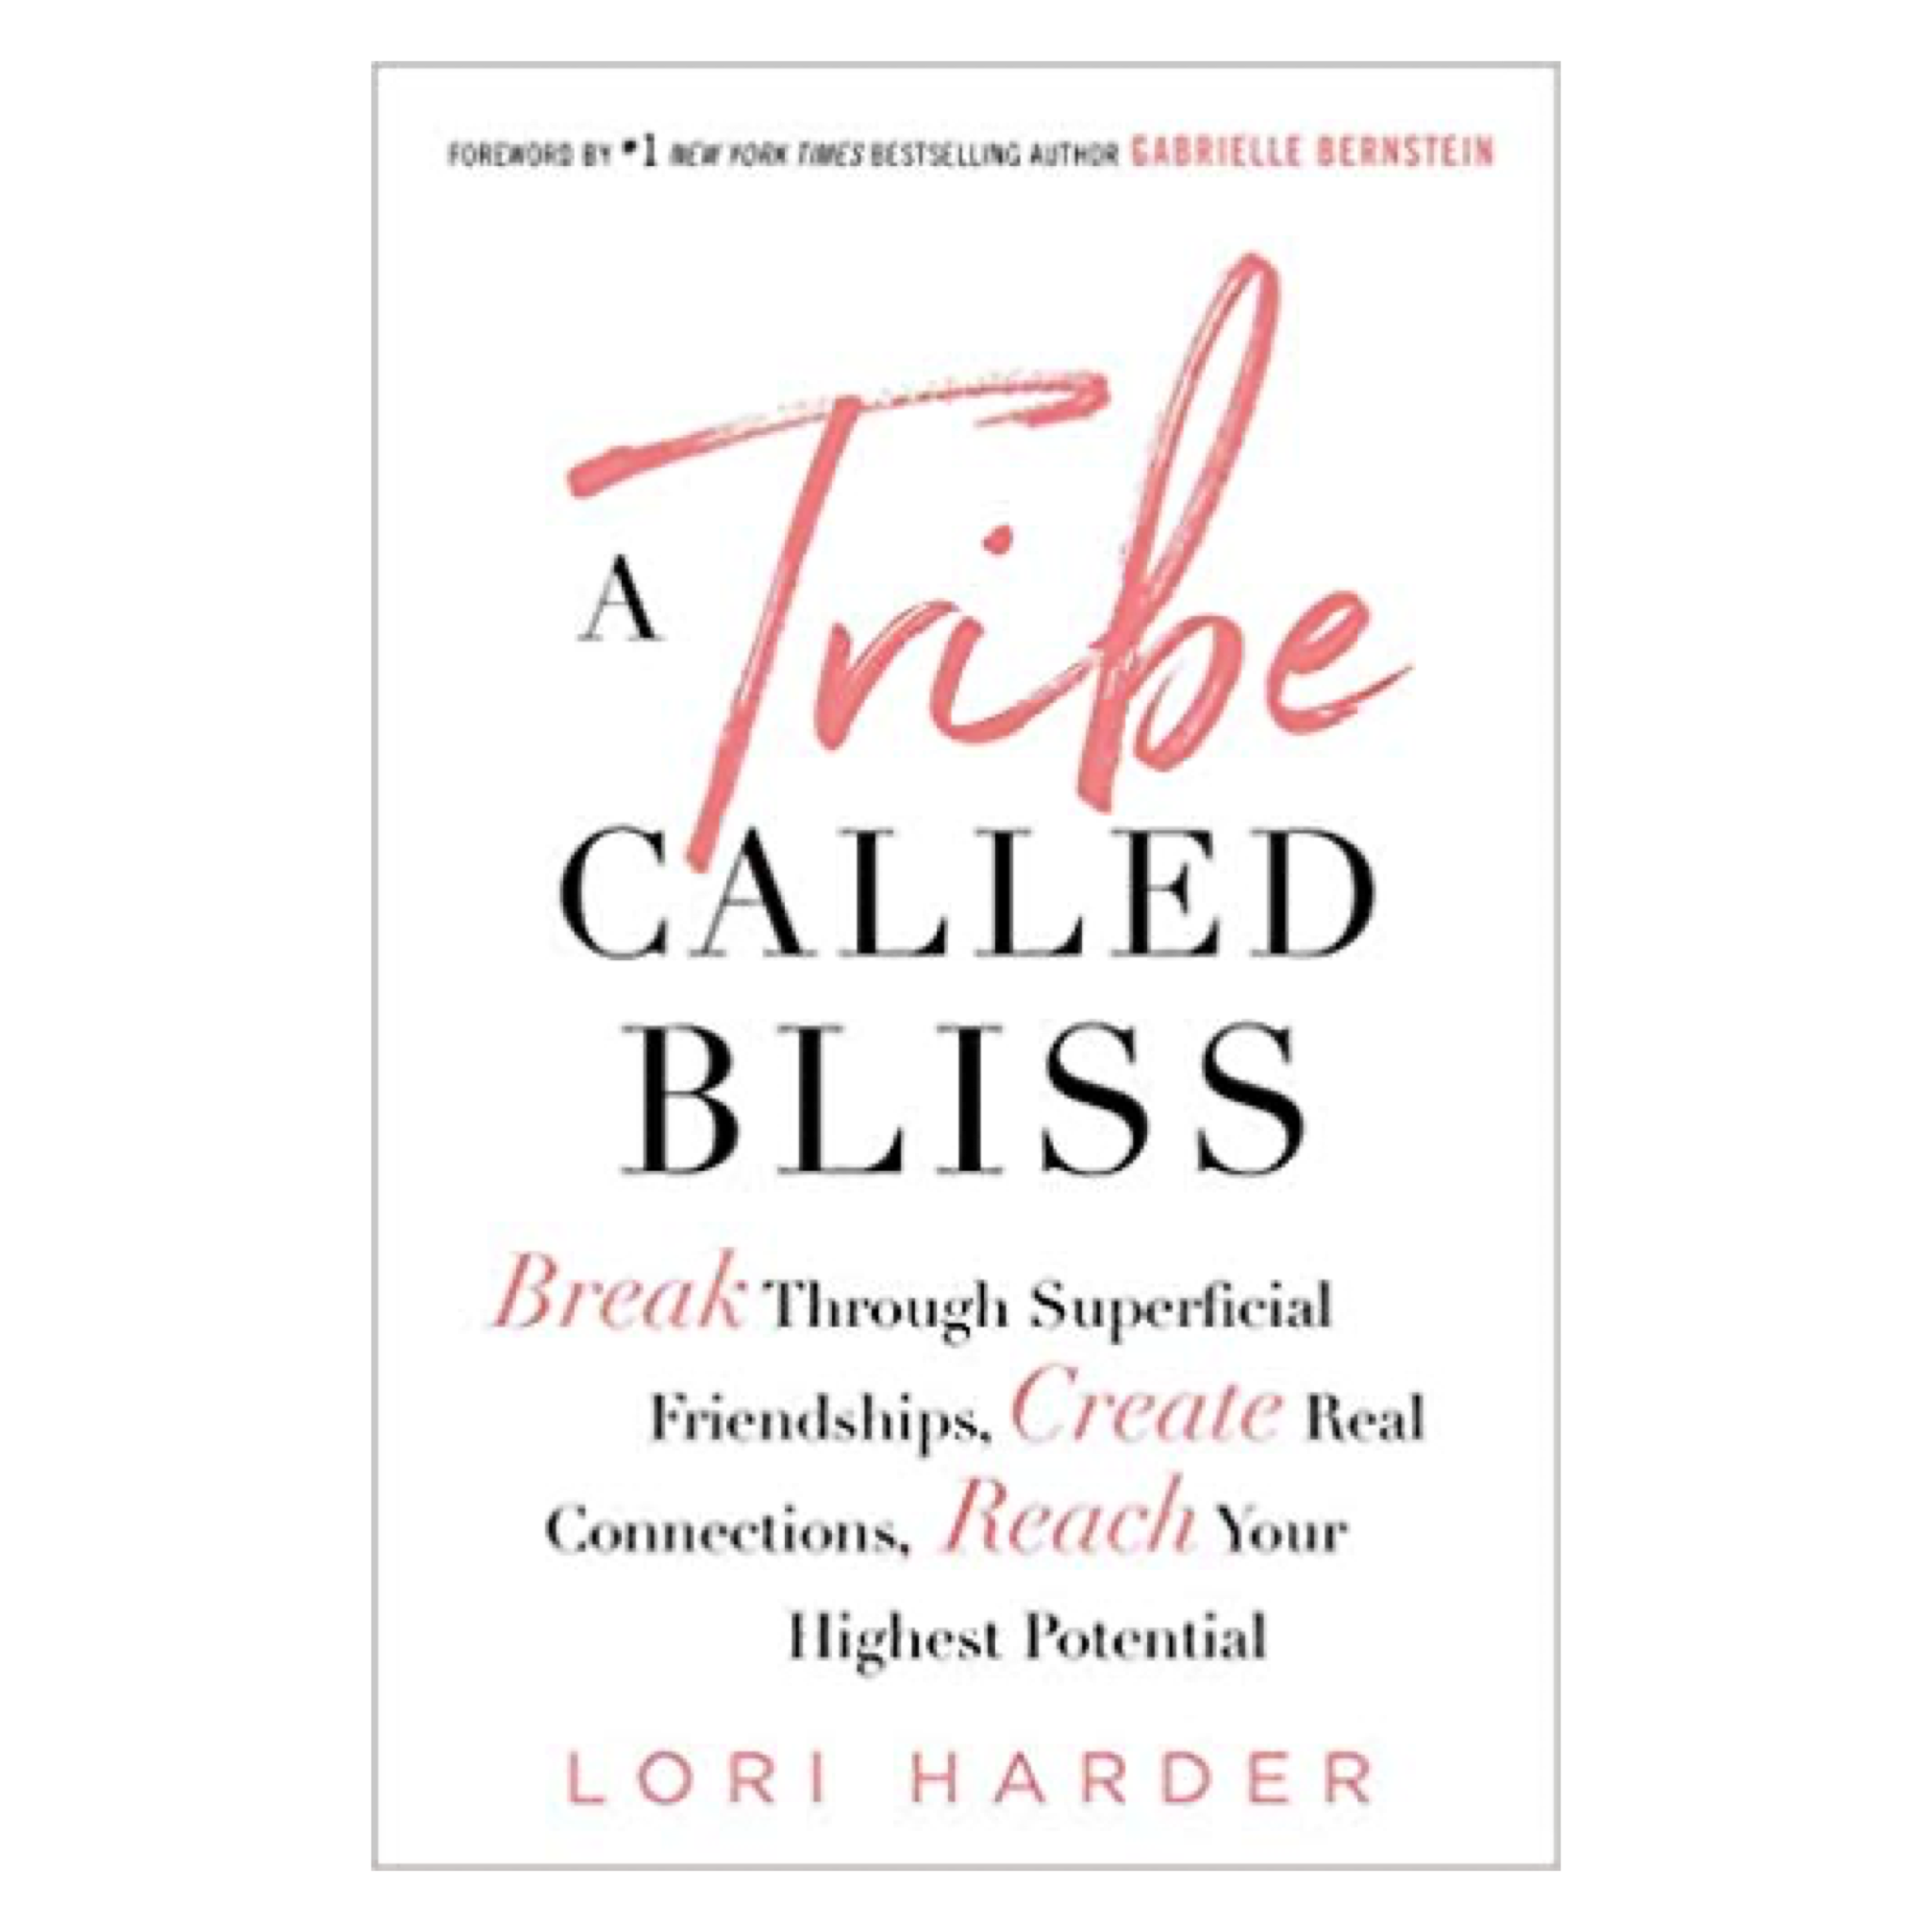 A Tribe Called Bliss by Lori Harder